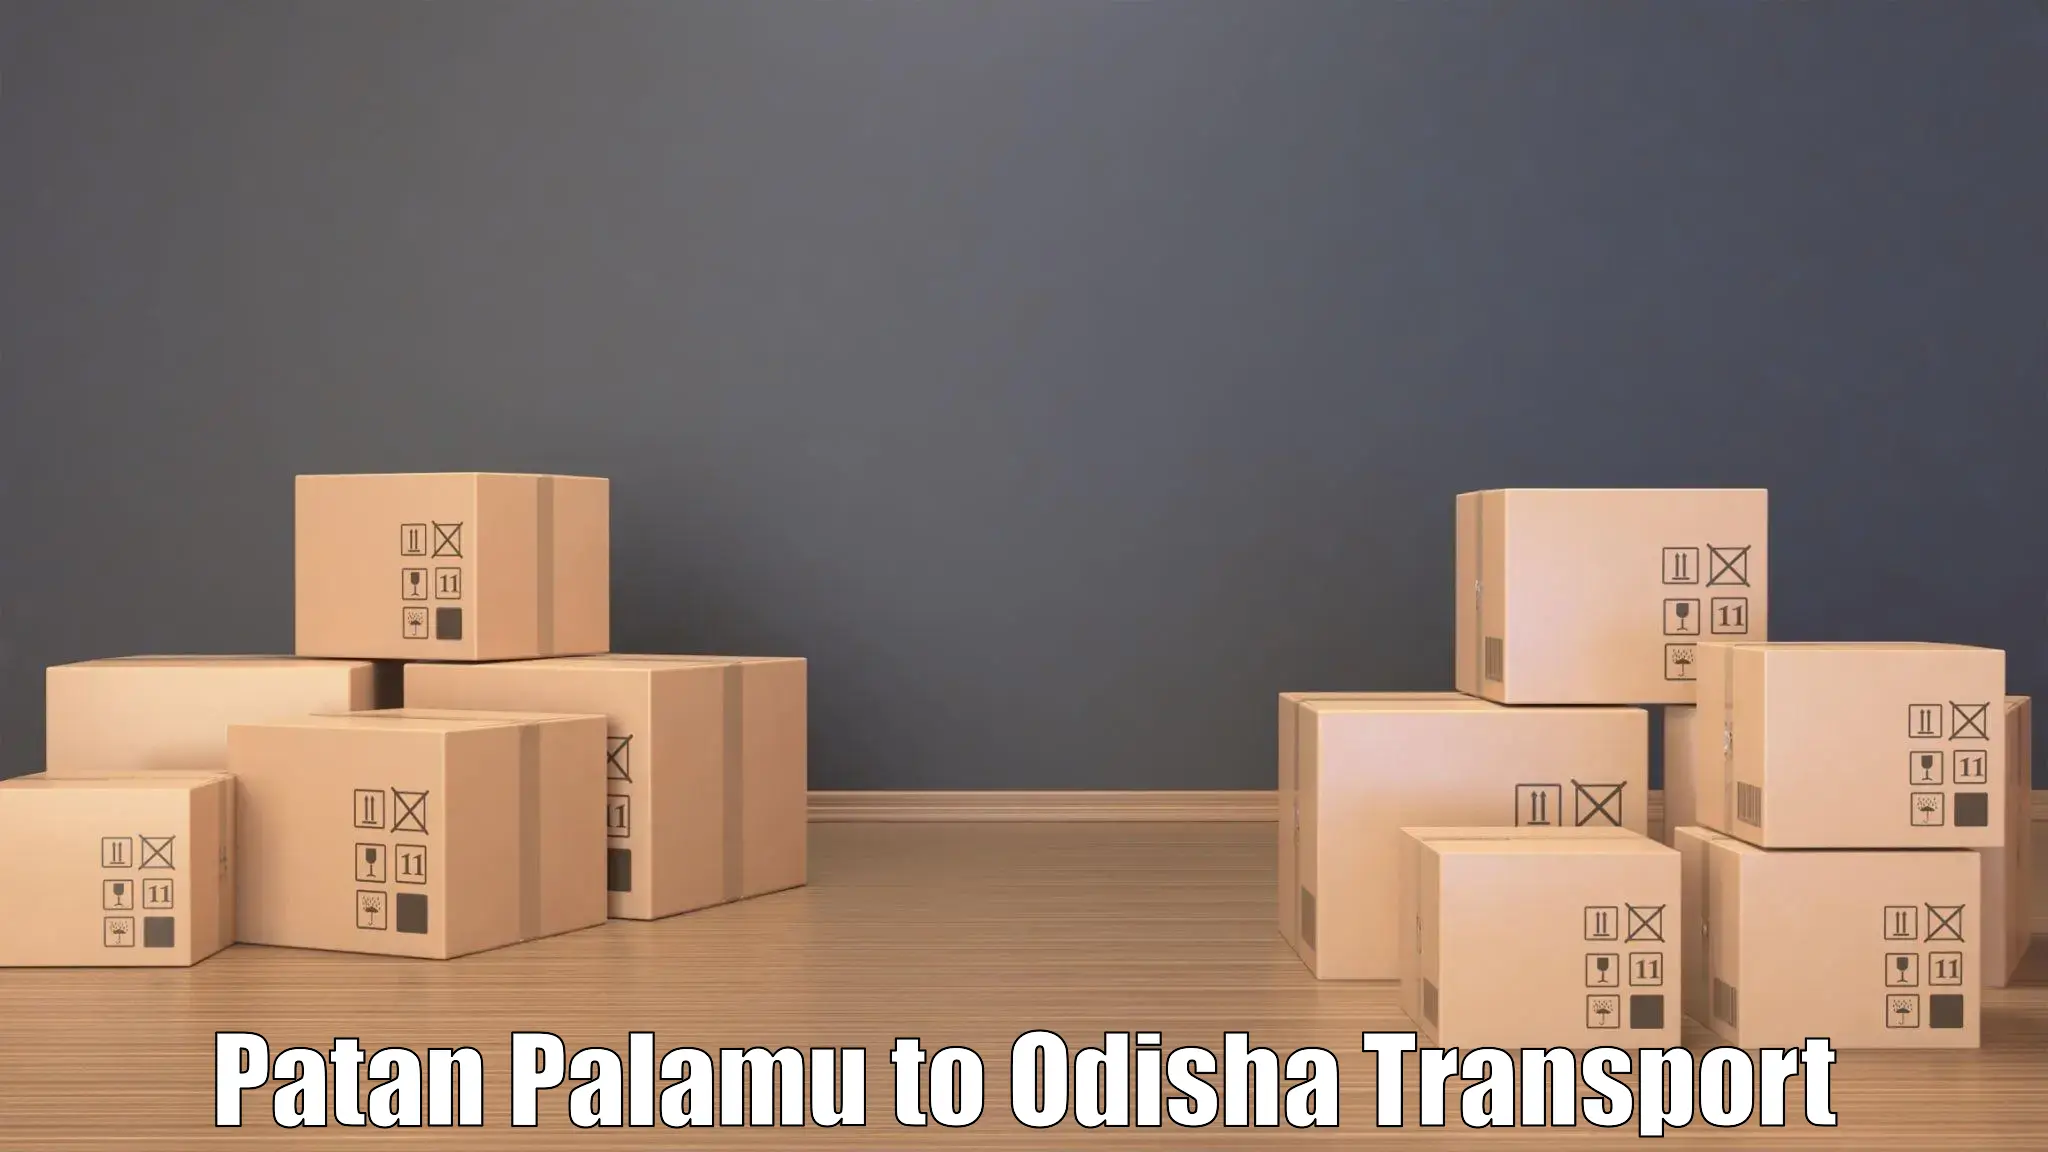 Daily parcel service transport in Patan Palamu to Talcher